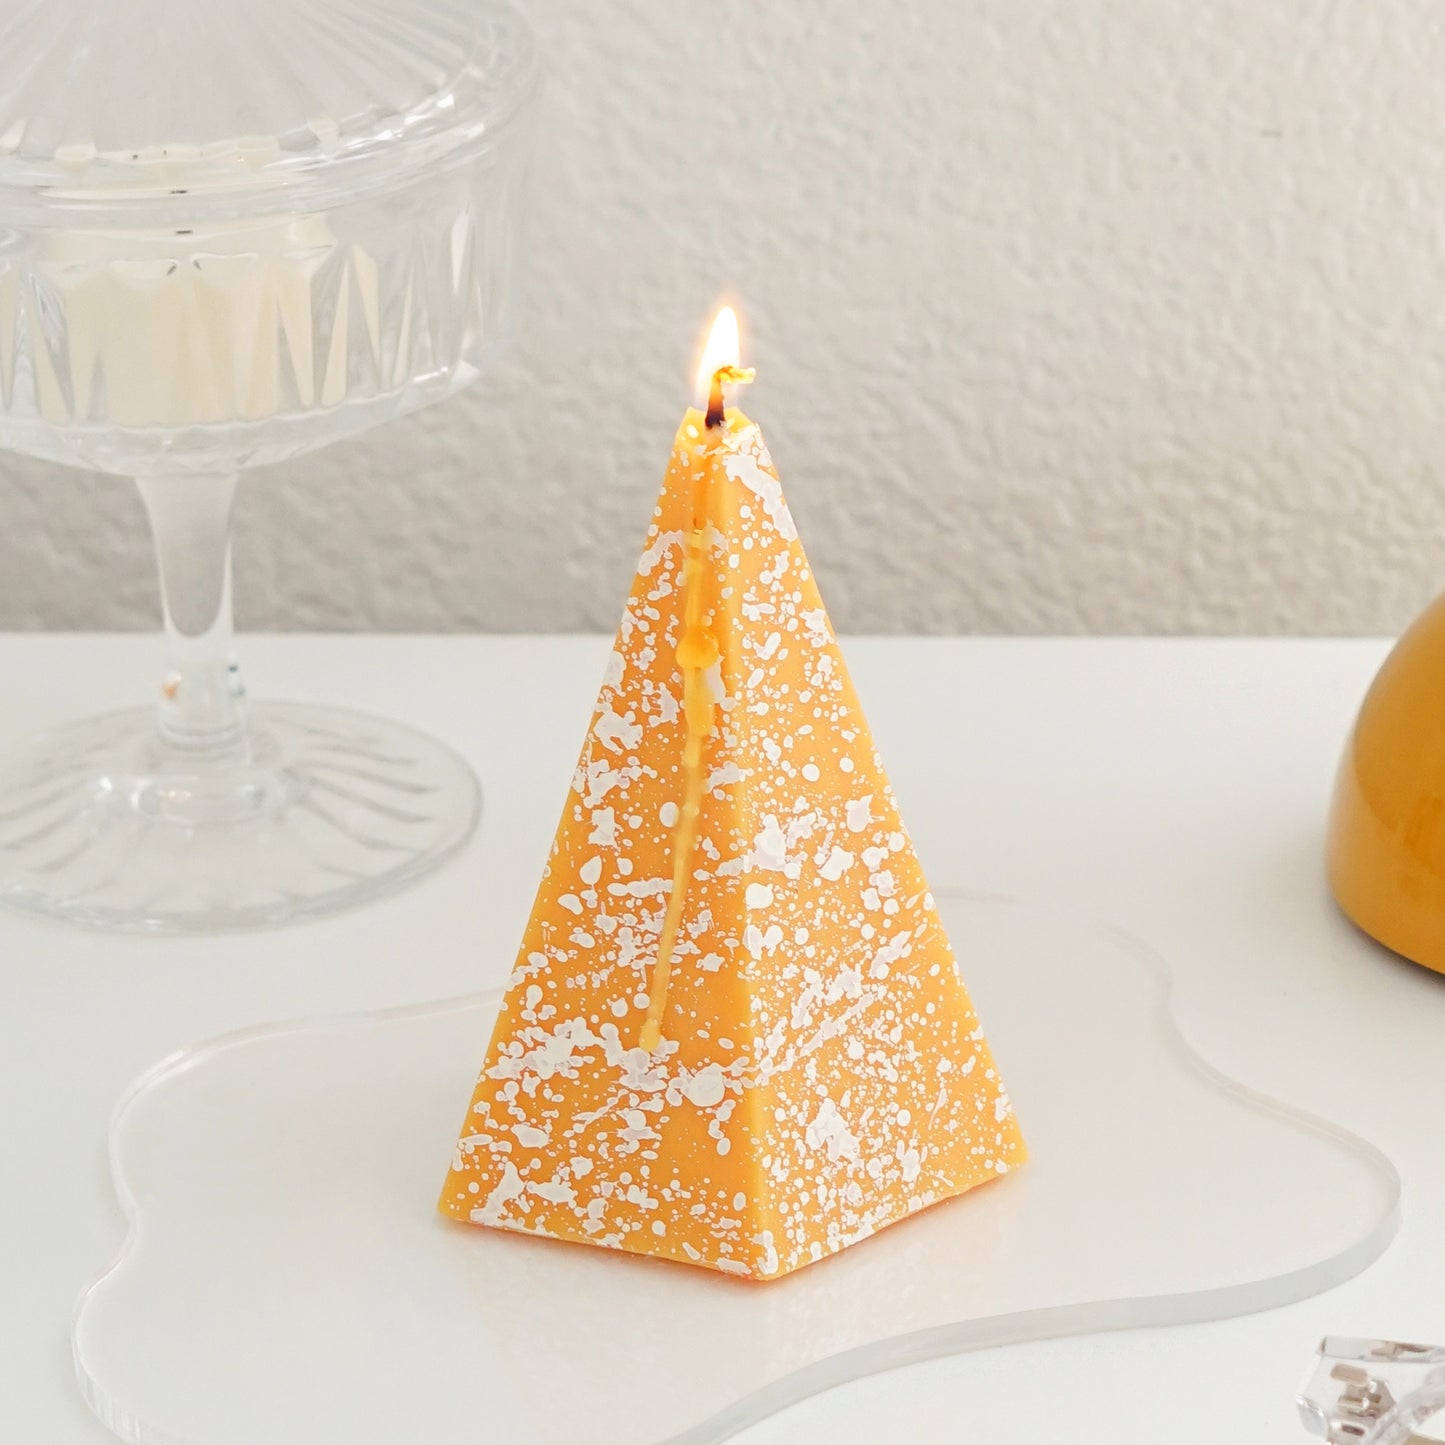 lit pentagonal pyramid shape yellow soy pillar candle with white splash pattern is placed on the white table with ikea clear glass tealight candle holder, yellow &tradition flowerpot lamp, and midnight blue iphone 13